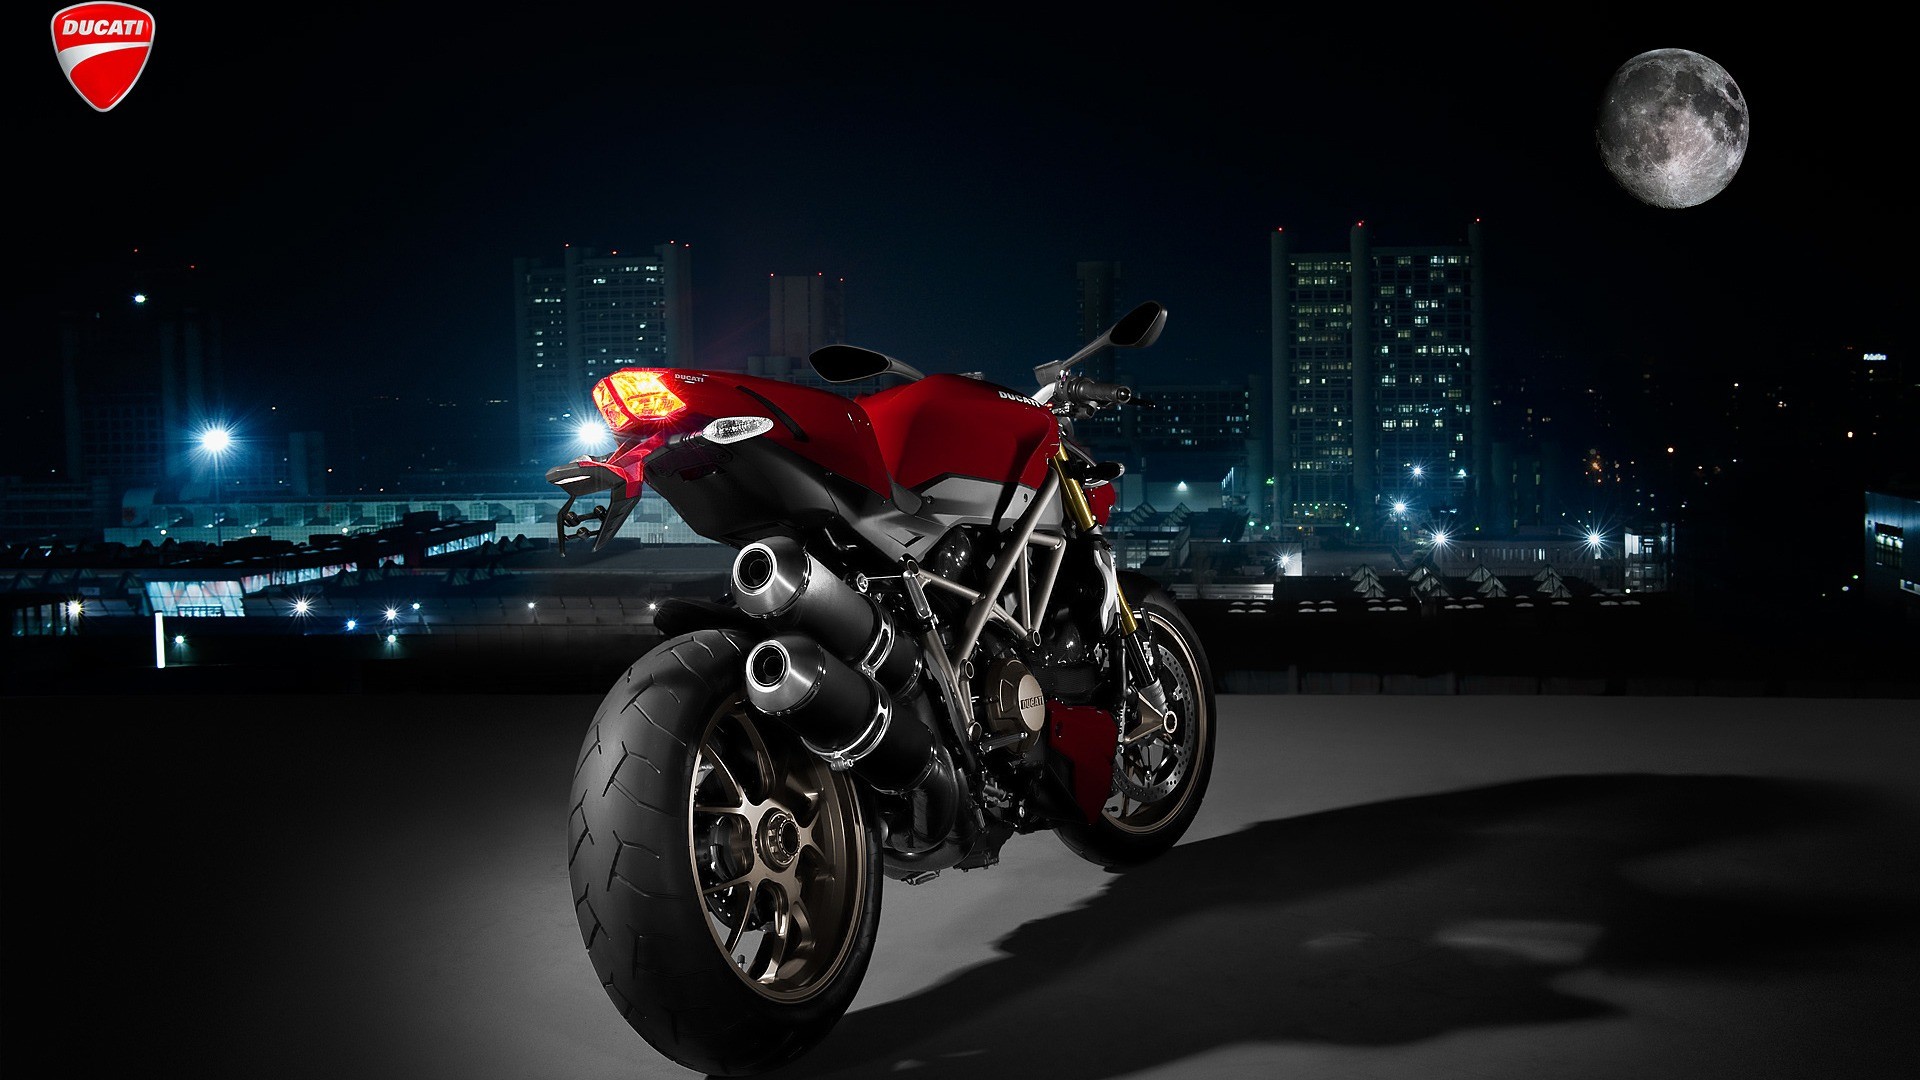 1920x1080 Ducati Streetfigther Wallpaper Ducati Motorcycles Wallpapers